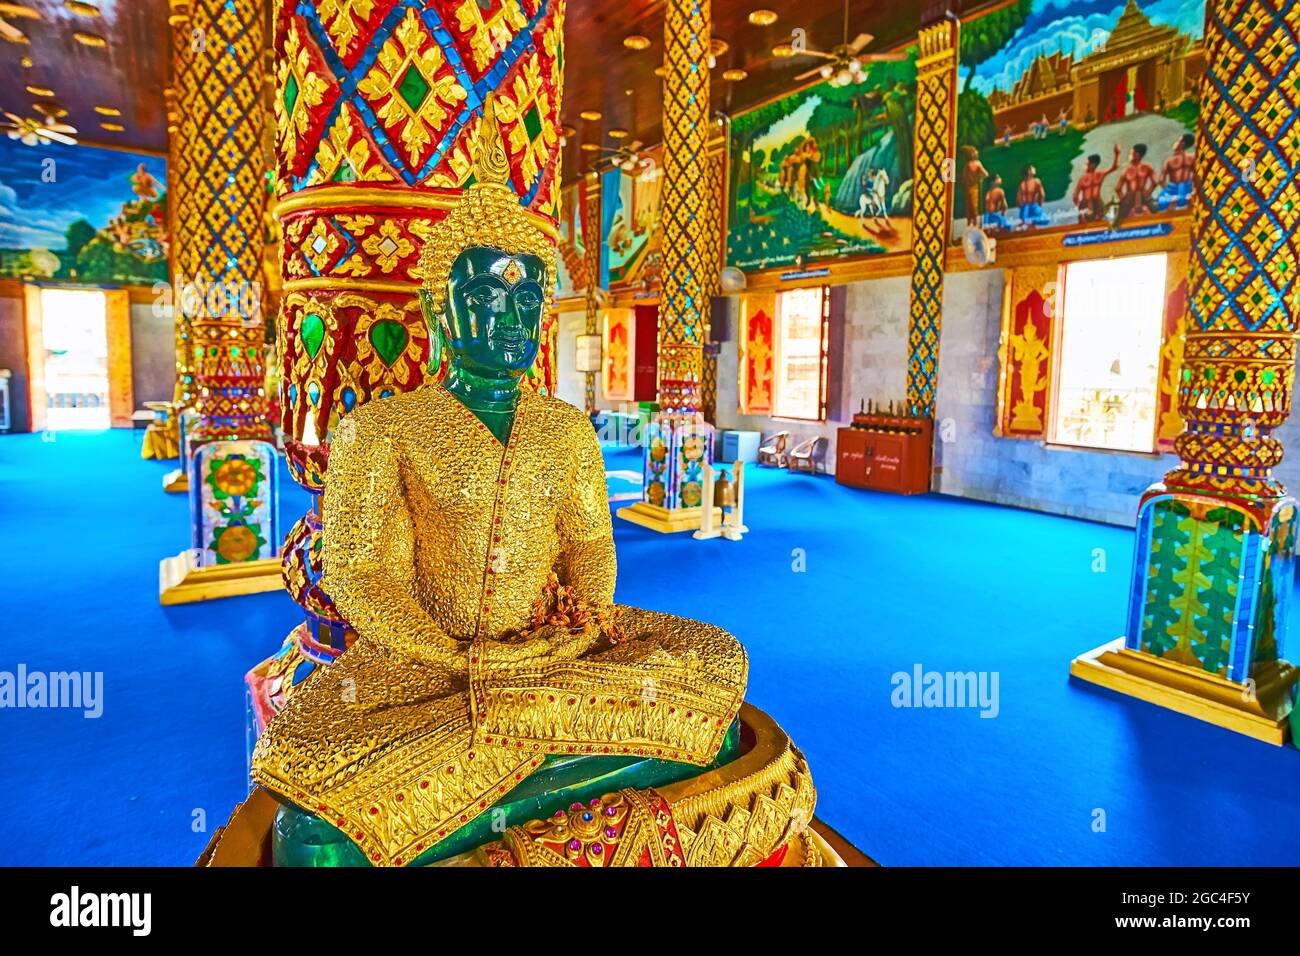 LAMPHUN, THAILAND - MAY 8, 2019: The Emerald Buddha in golden attire in Wat Chammathewi Assembly Hall (Viharn), on May 8 in Lamphun Stock Photo